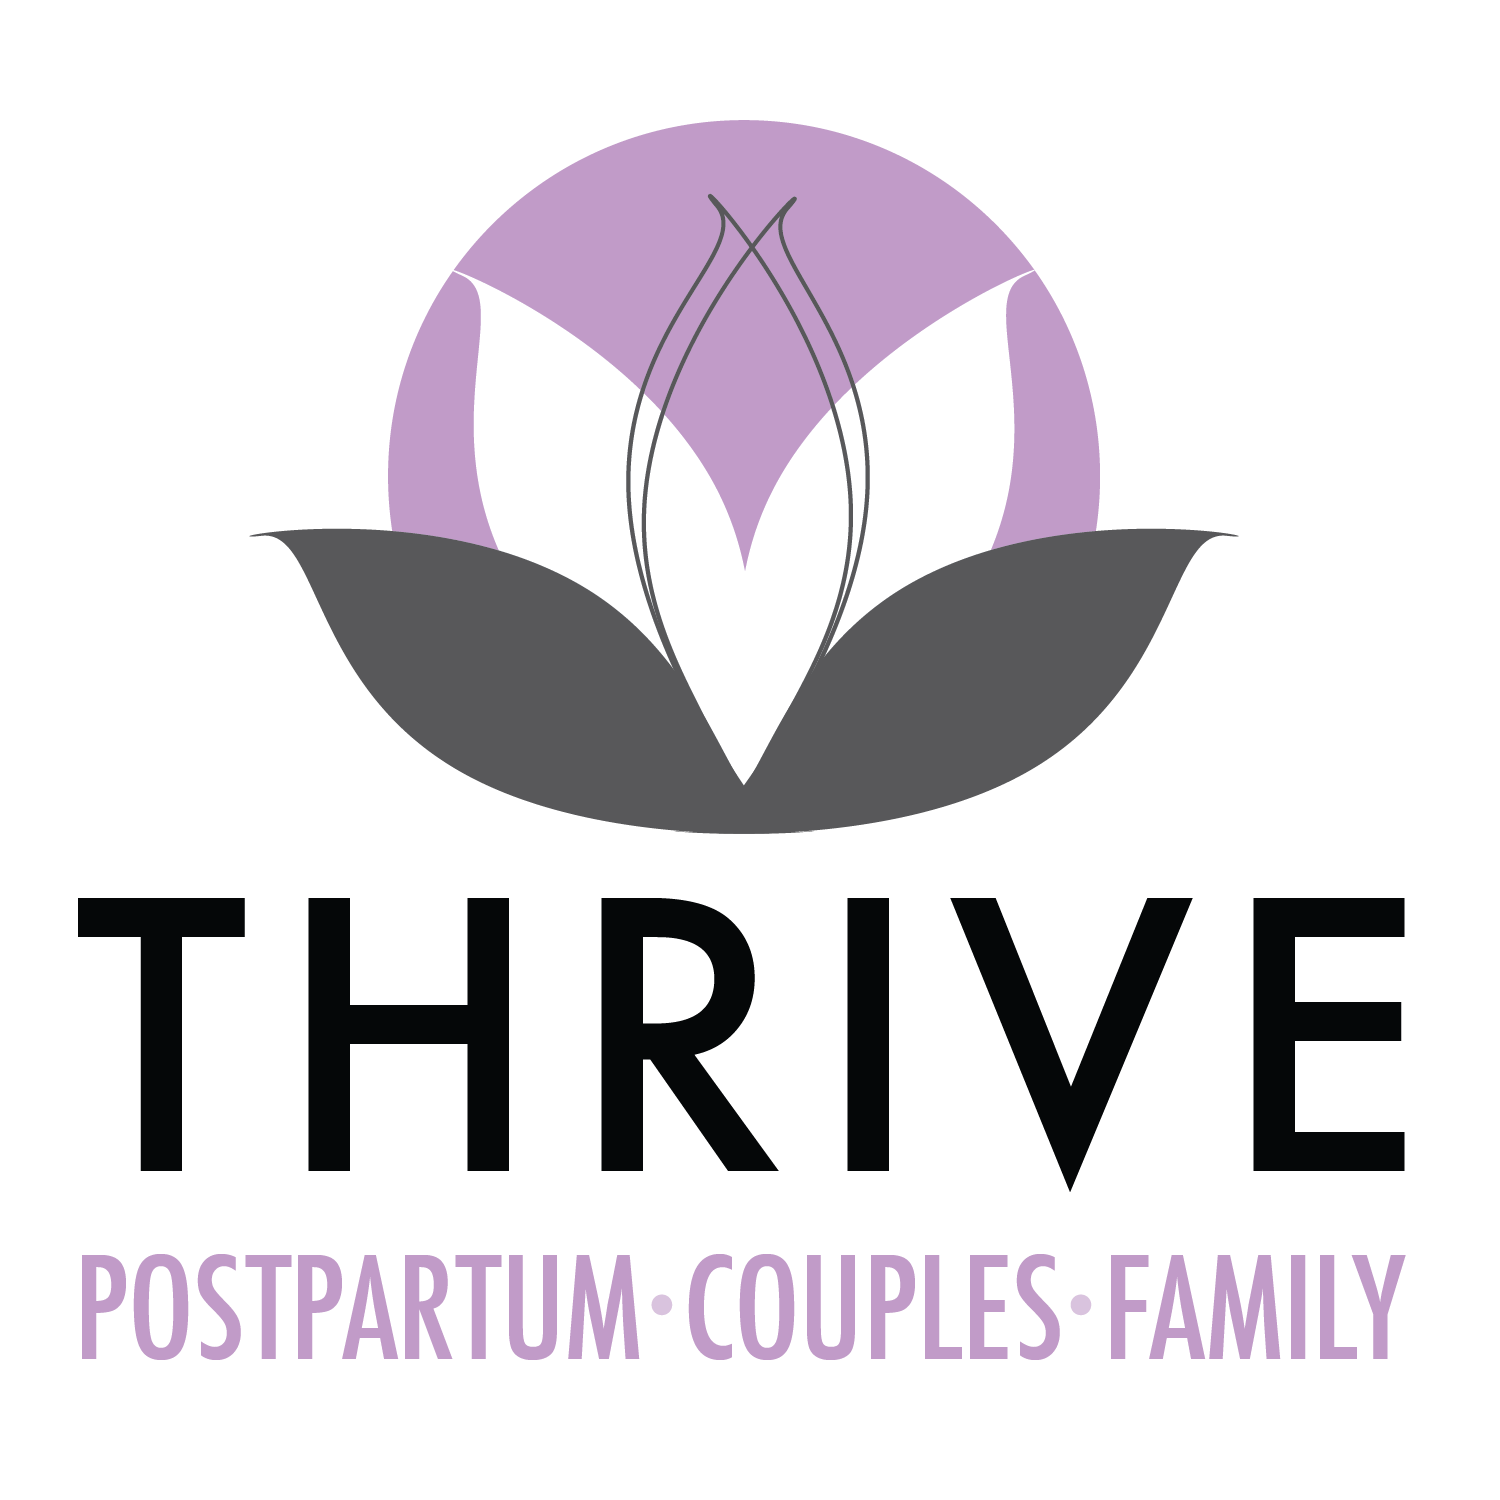 Here are Postpartum Counseling and Support Services in Greenville, SC